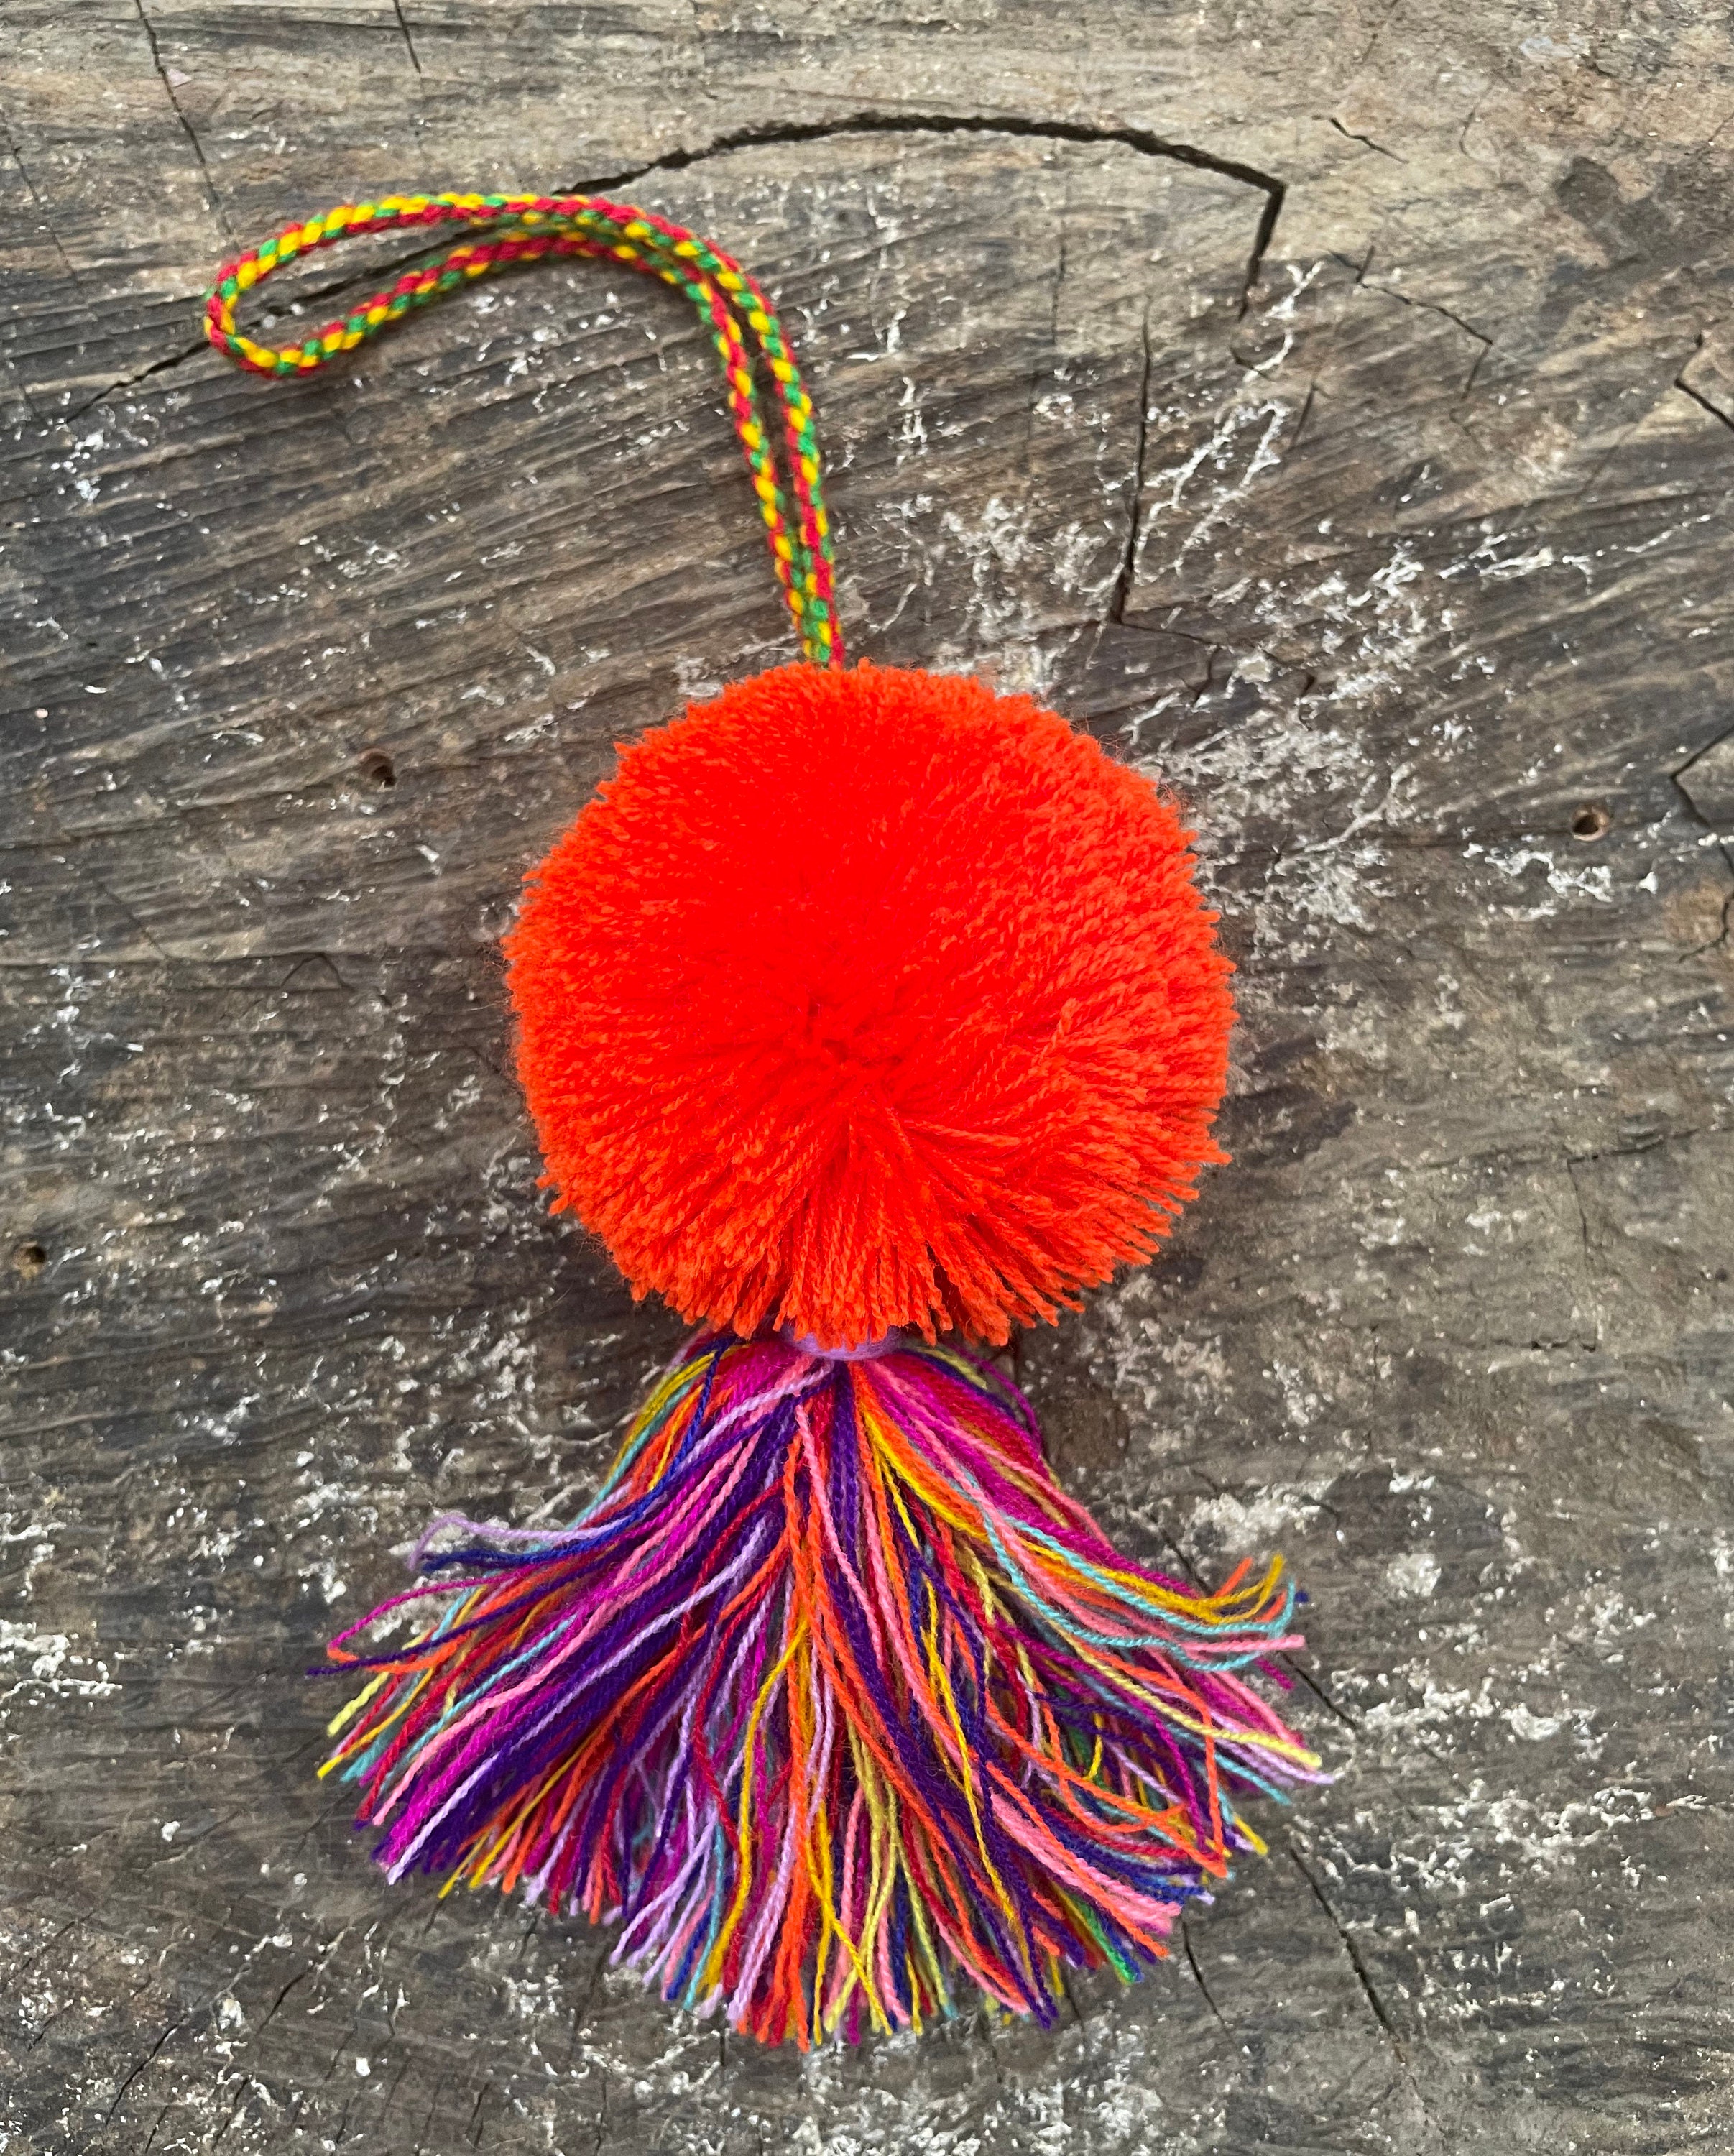 Mayan Arts Tassels with Pom Poms, Red and White, Team School Colors, Home Decor, Gift Tag, Decorative Small Handmade Pom Pom, Fair Trade Guatemala